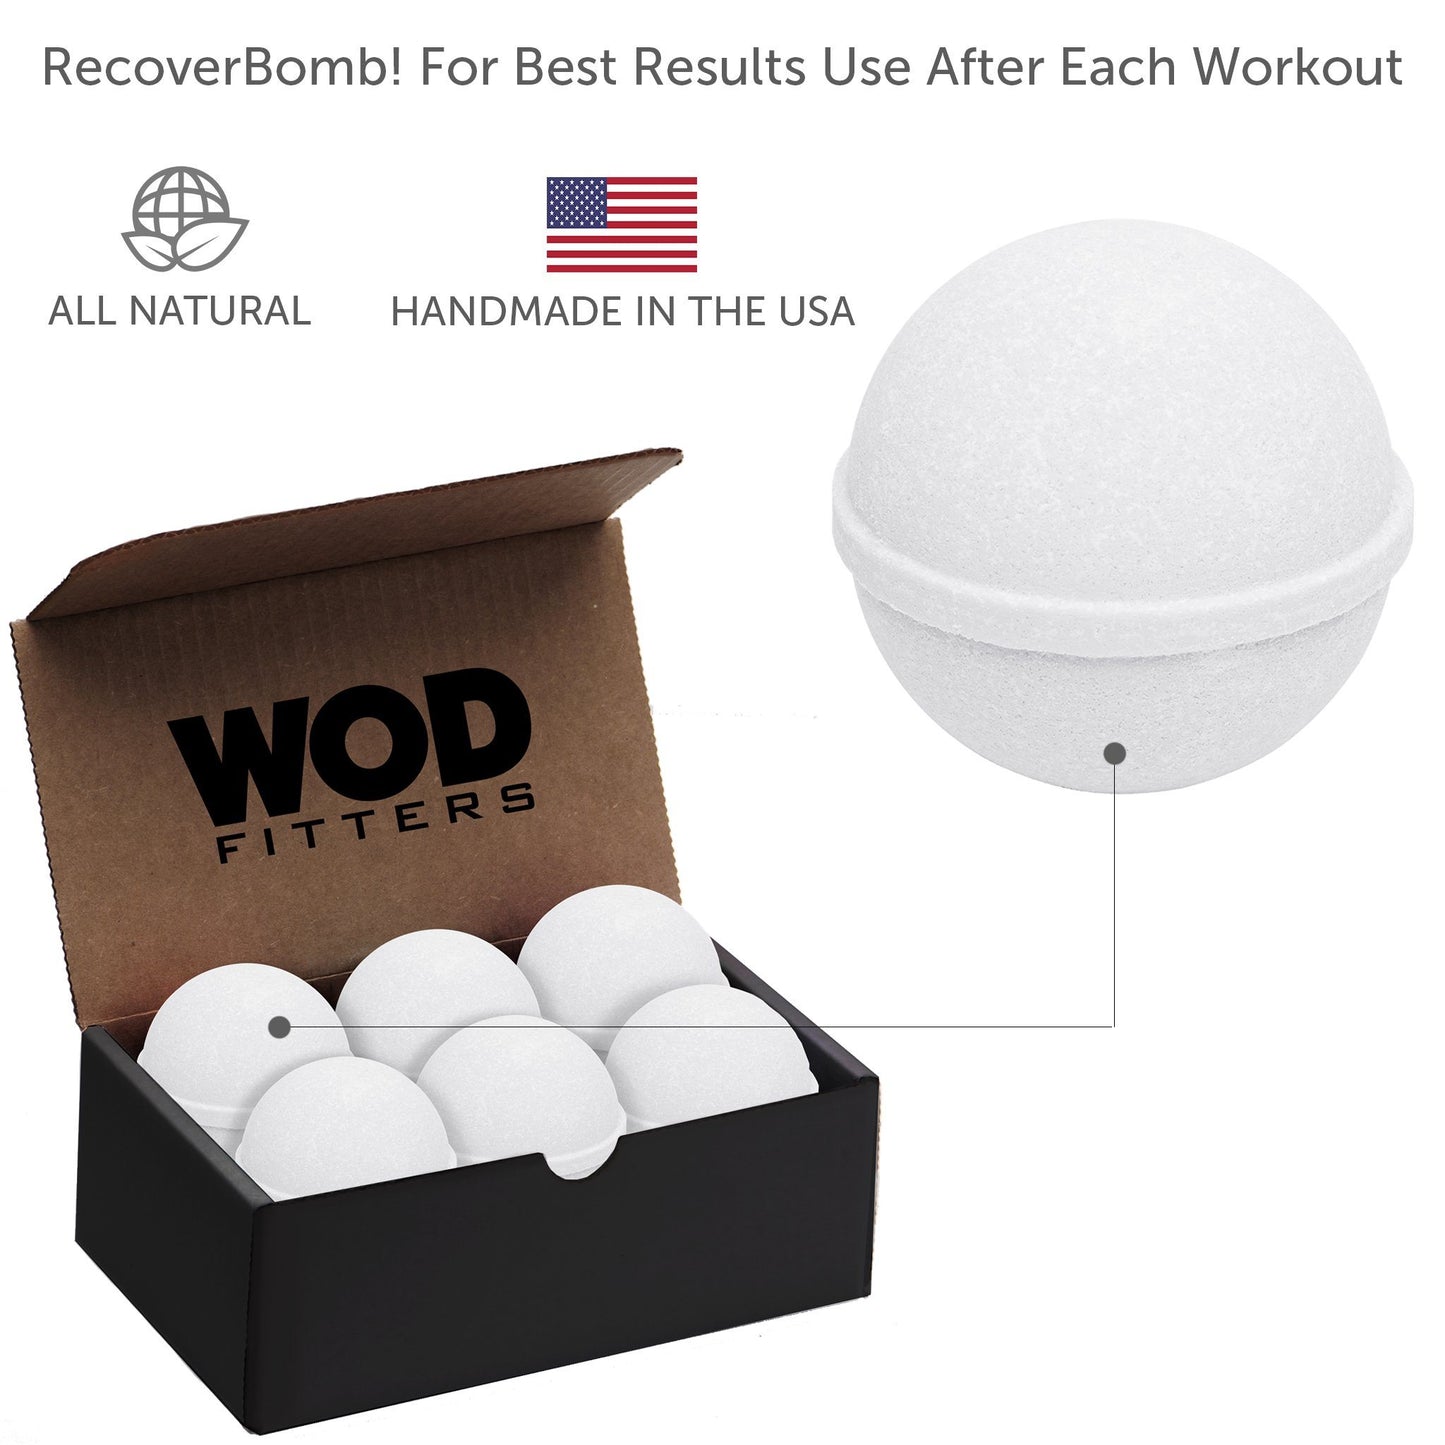 RecoverBomb! - Bath Bombs Scientifically Formulated for Fast Relief from Muscle Soreness After Tough Workouts - 6 Pack 